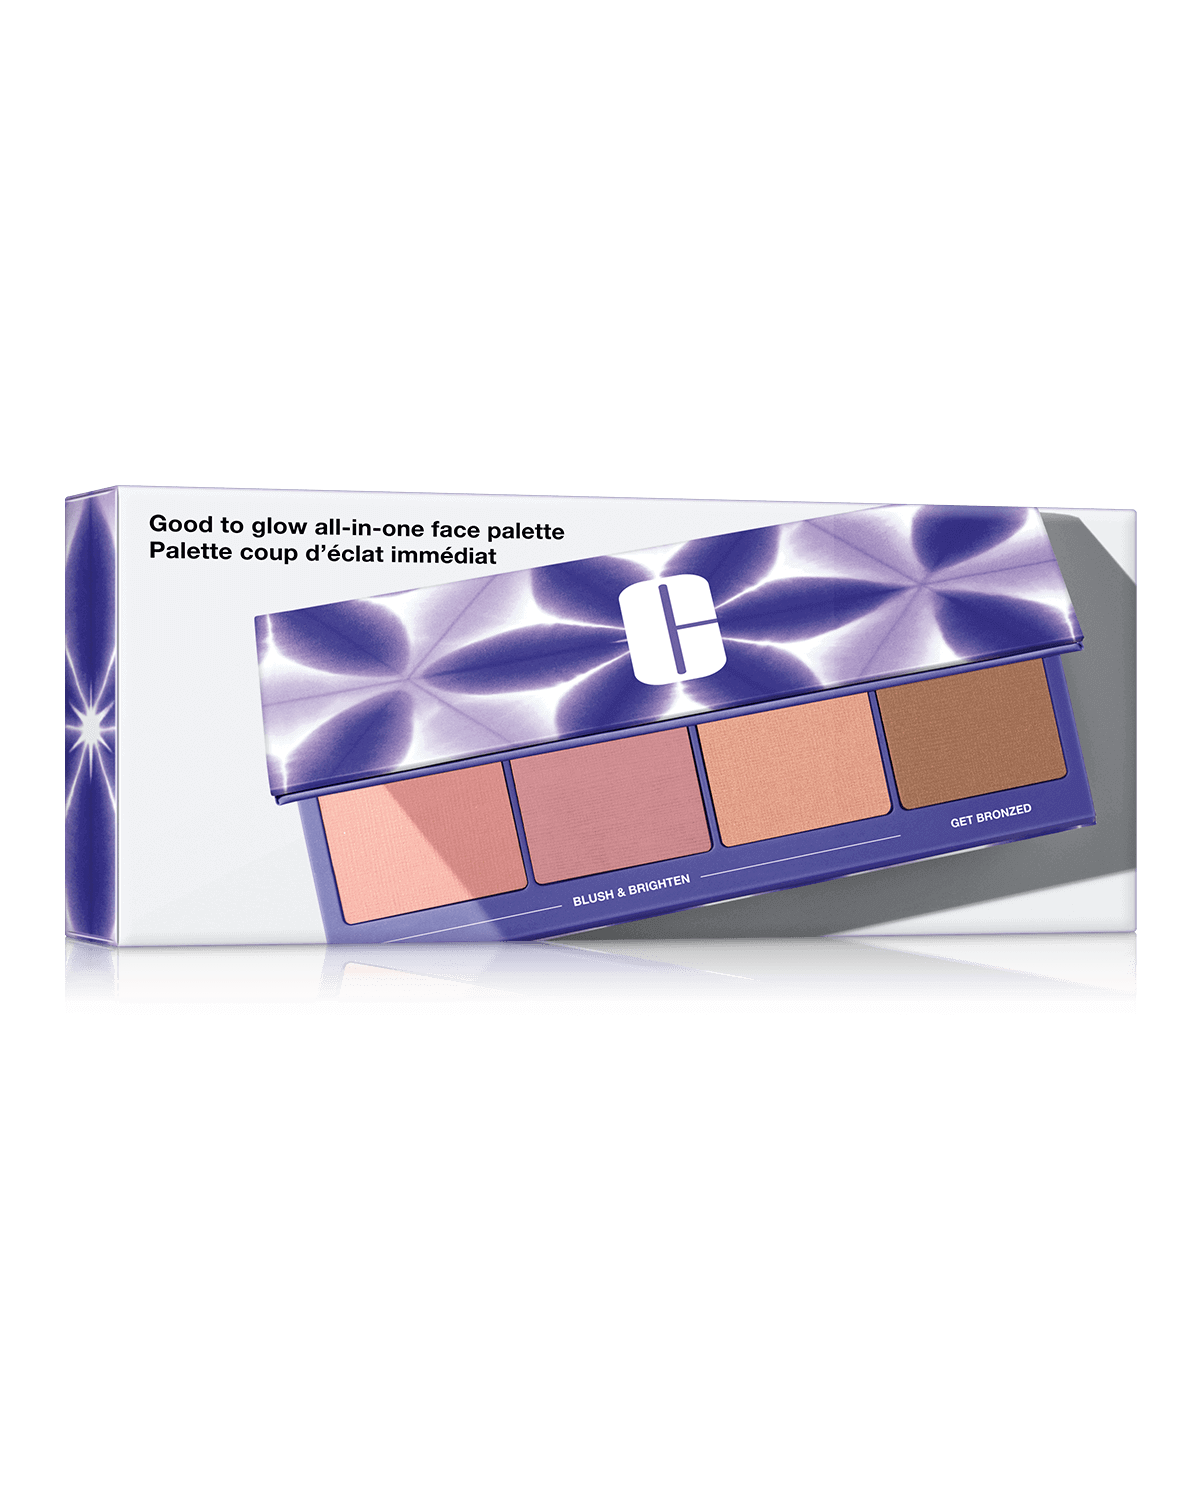 Good to Glow: All-in-One Face Palette